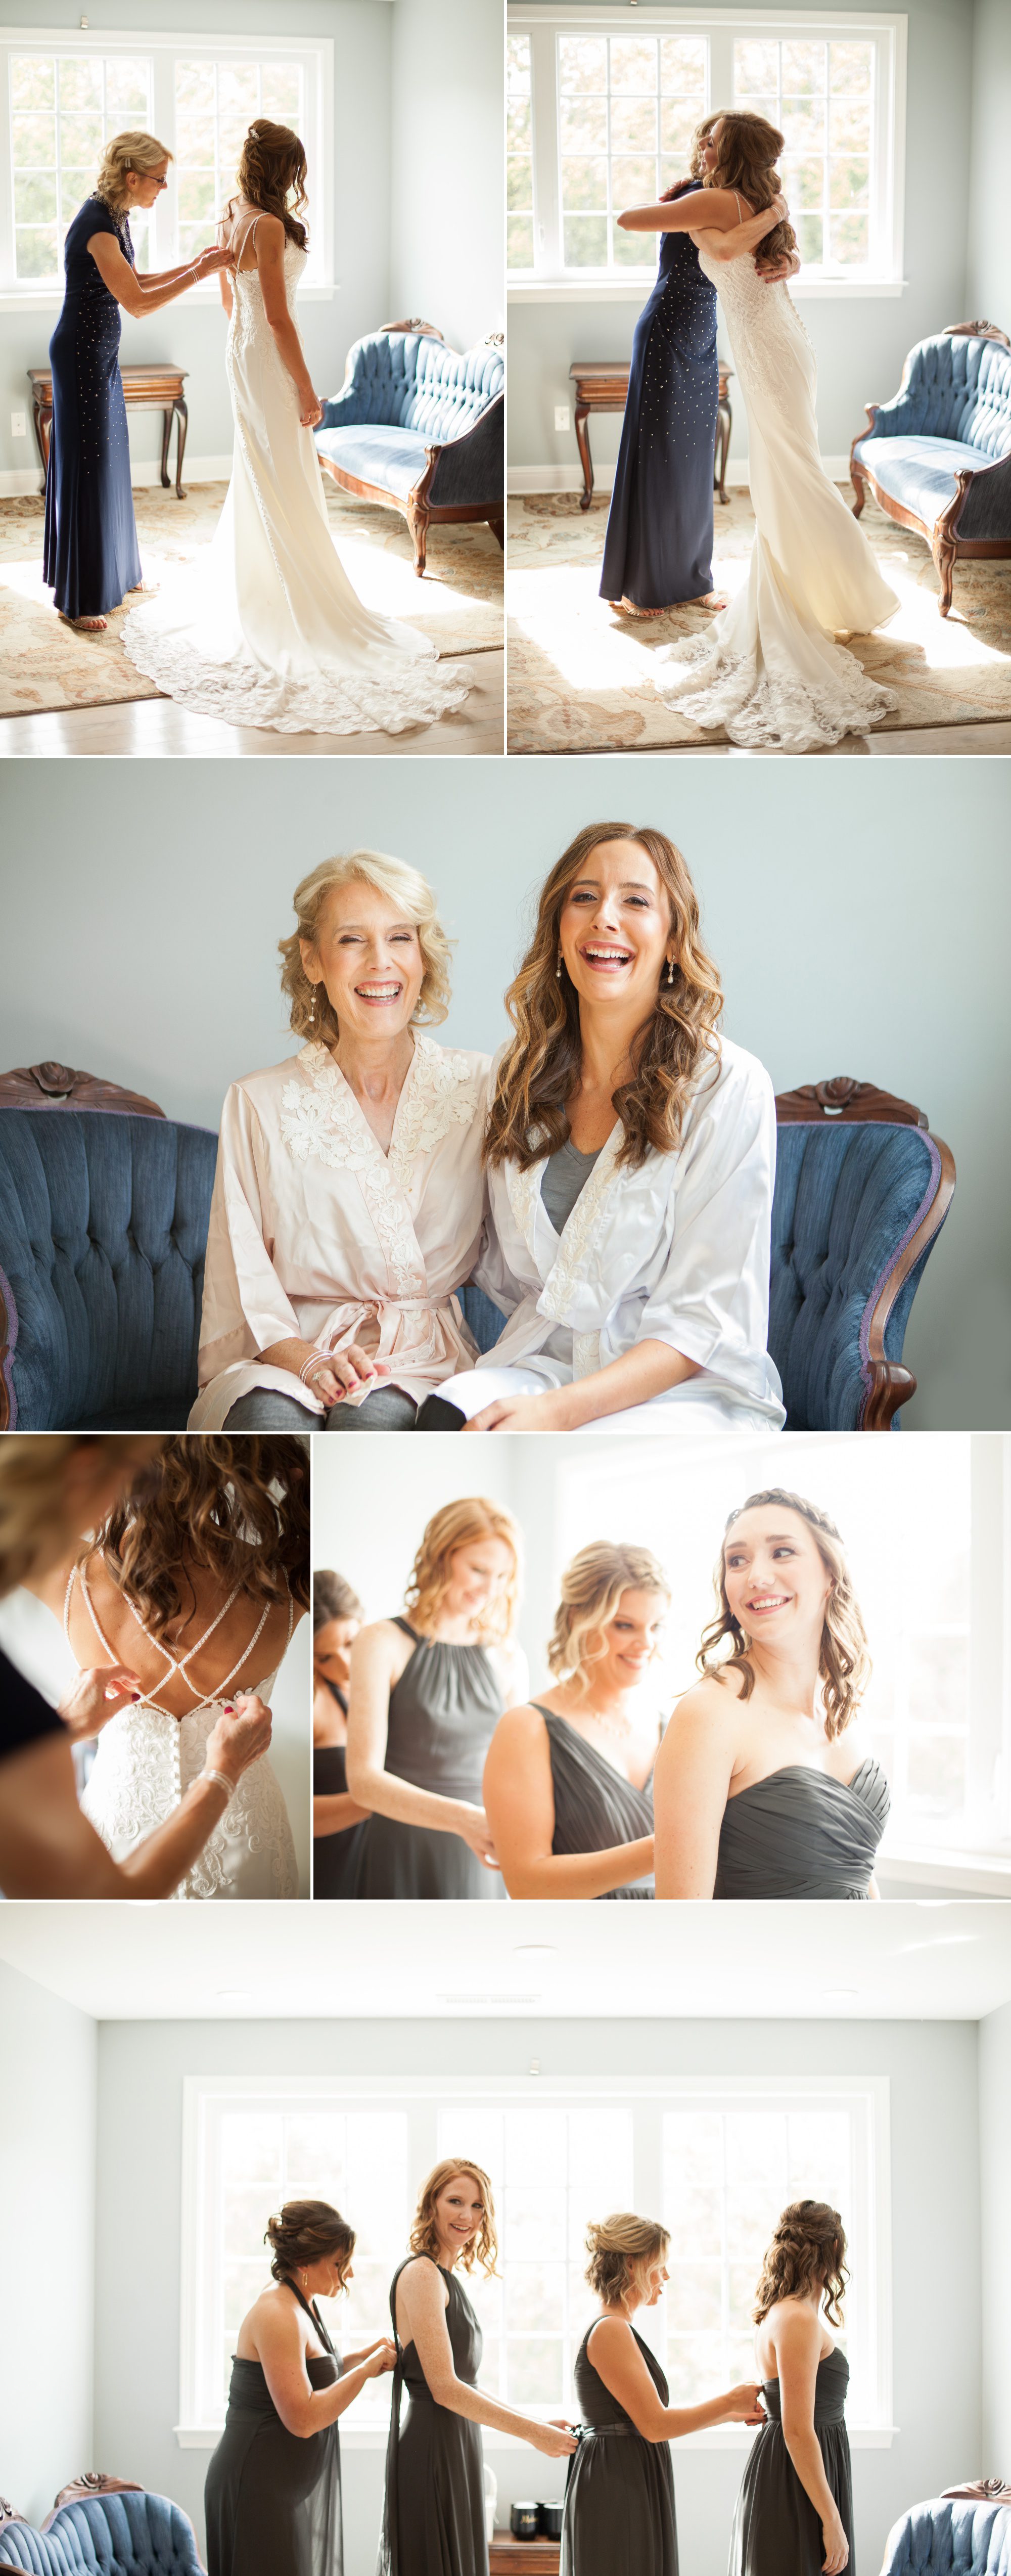 Bride and mom getting ready with bridesmaid photos before wedding ceremony photography at Green Door Gourmet in Nashville, TN